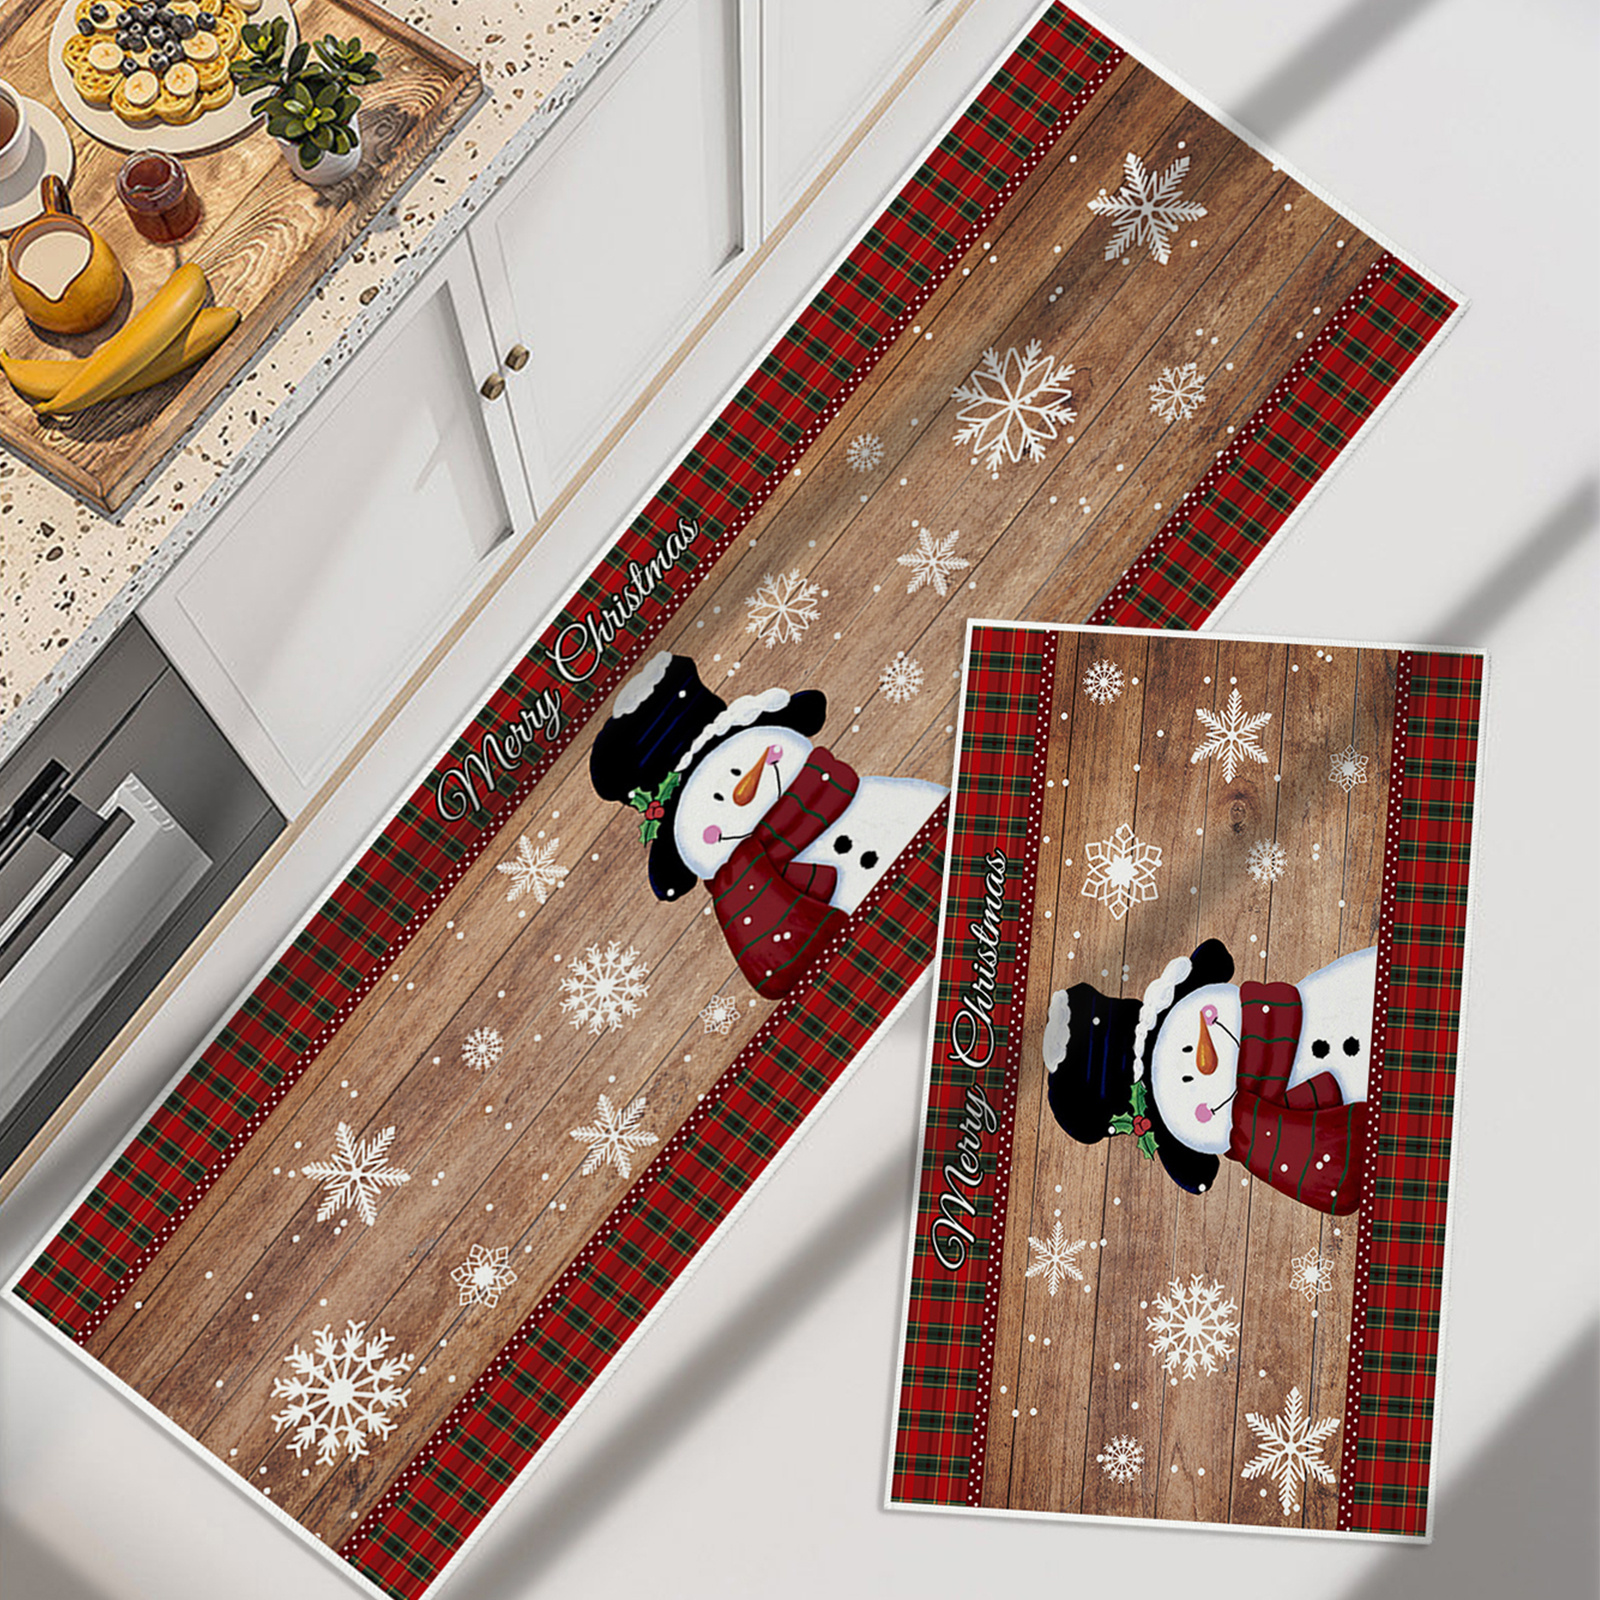 Roszwtit Chef Kitchen Rugs and Mats Set of 2, Christmas Believe Non-Slip  Backing Kitchen Rug, Kitchen Sets Low-Profile Washable Floor Mat for Home